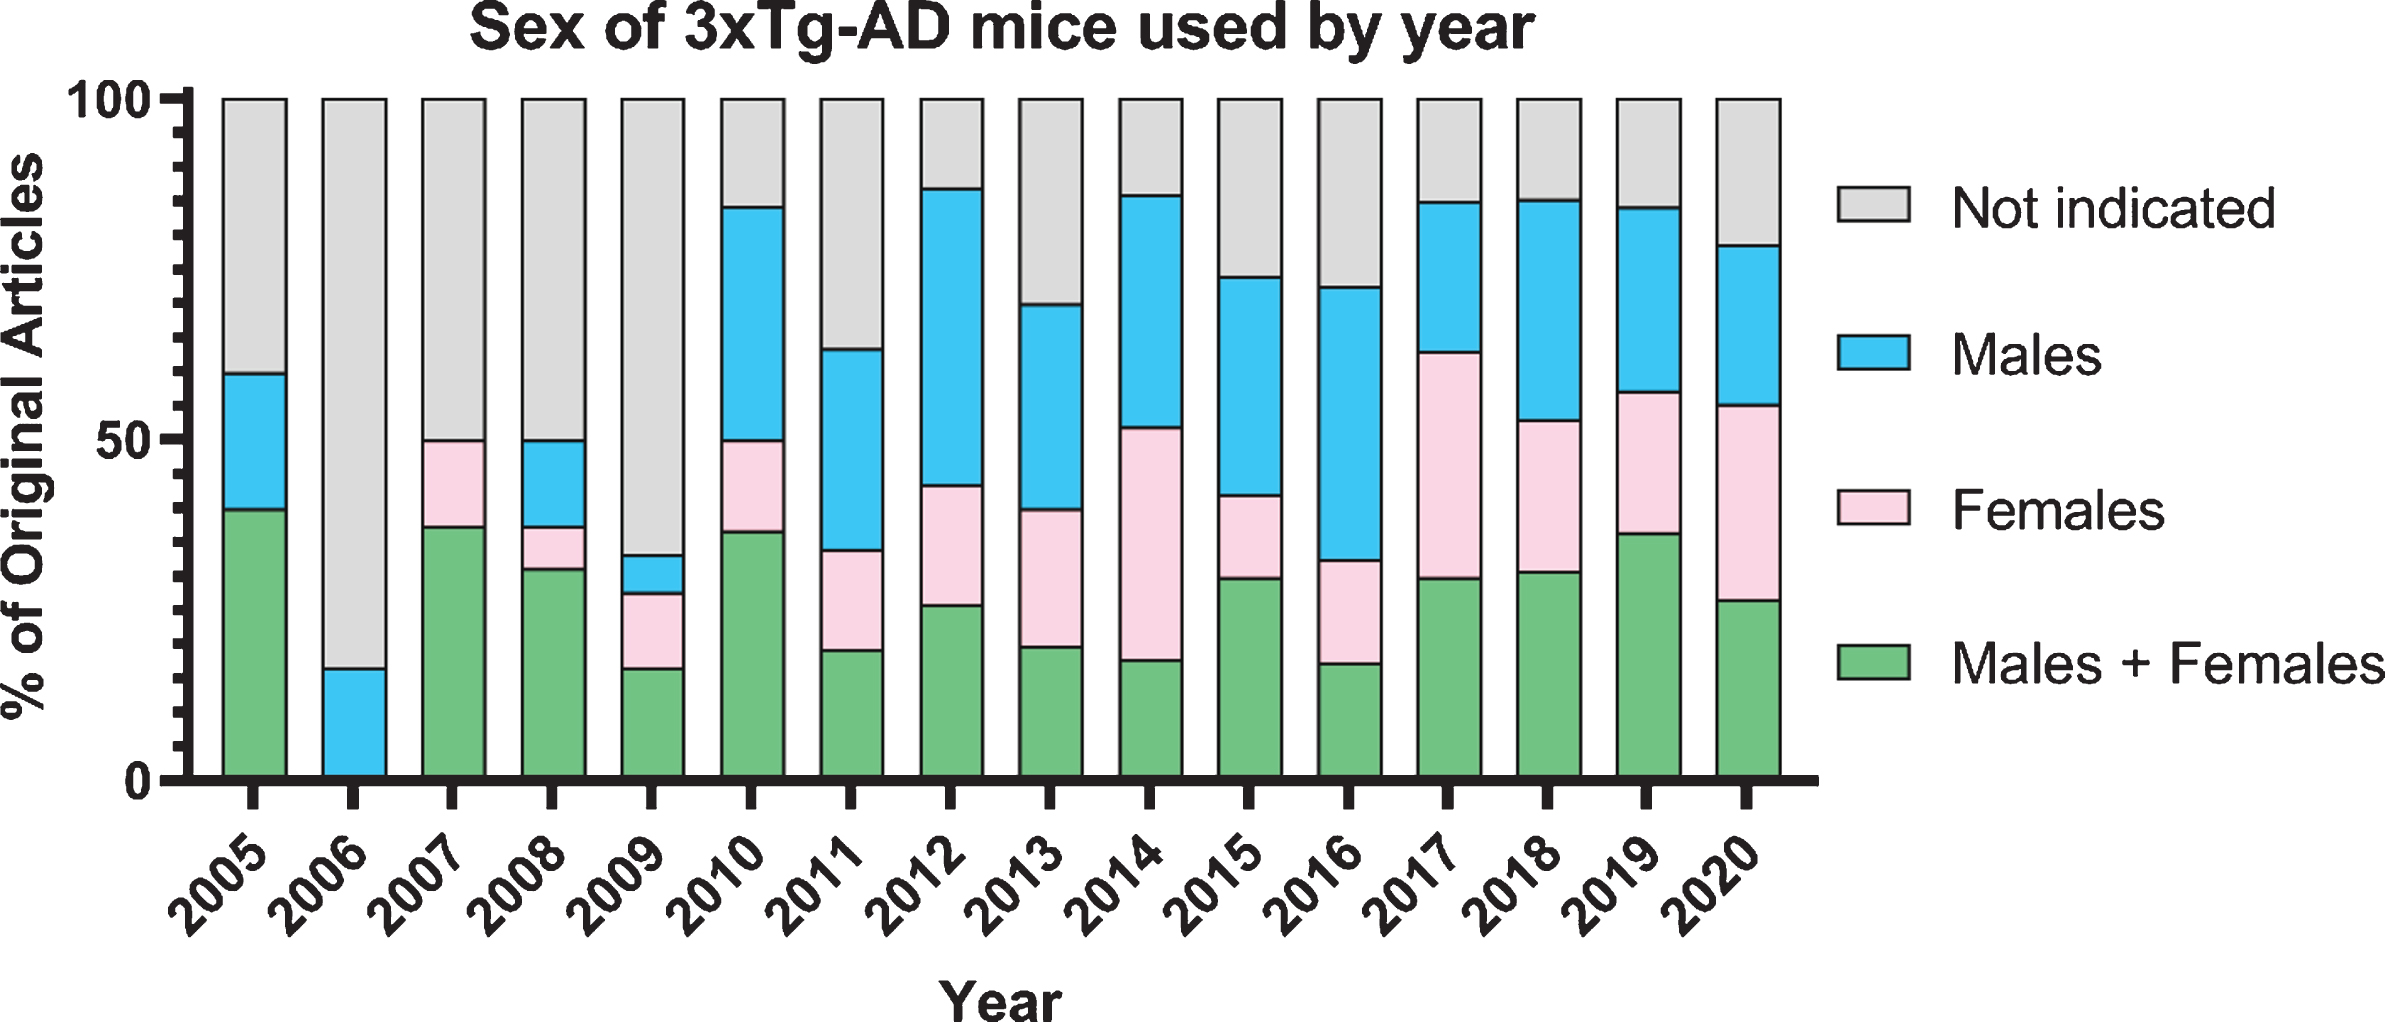 Graph of 613 original publications using 3xTg-AD mice by sex over time.